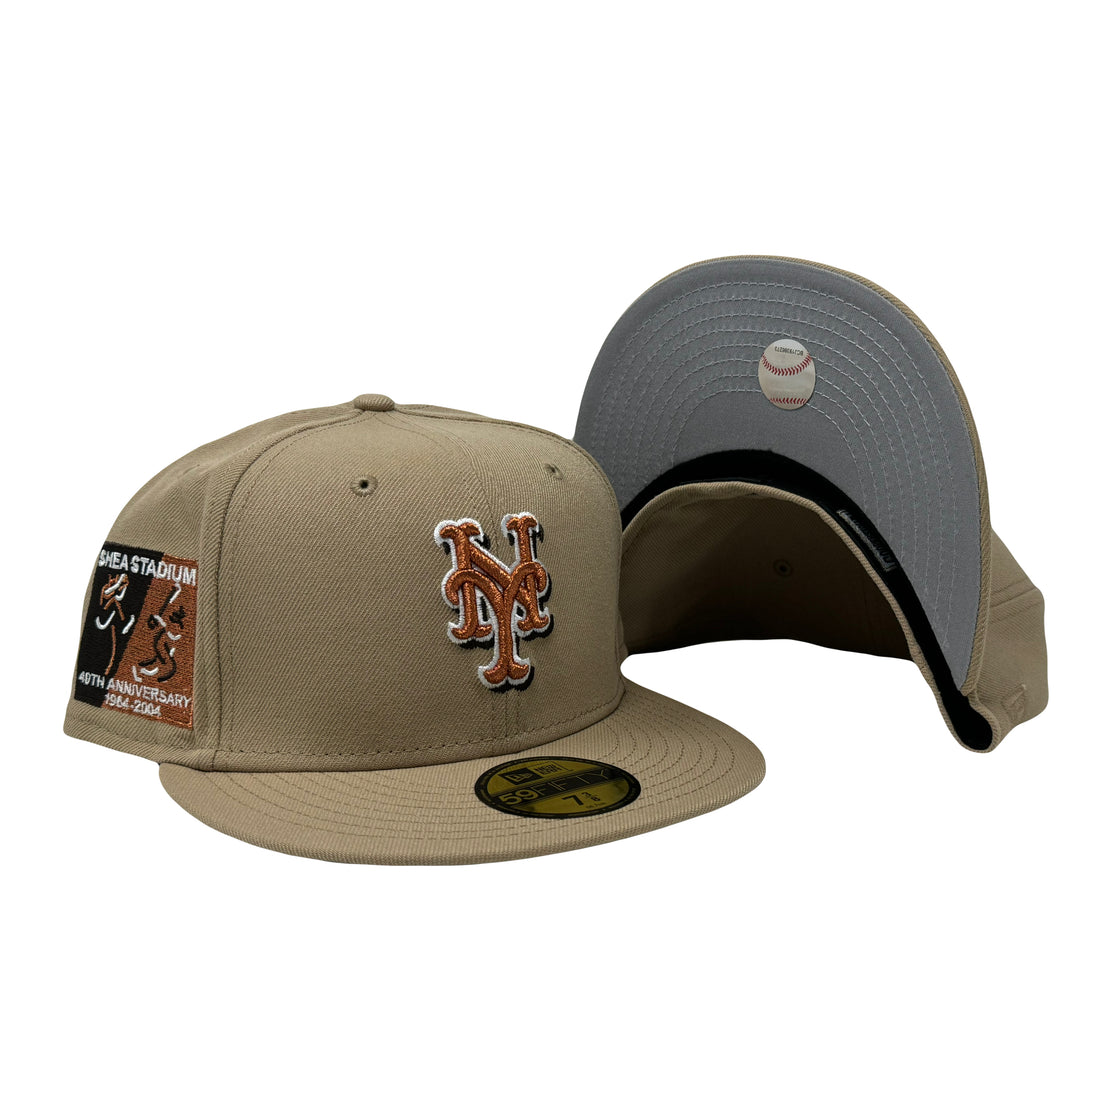 New York Mets Shea Stadium Camel 5950 New Era Fitted Hat